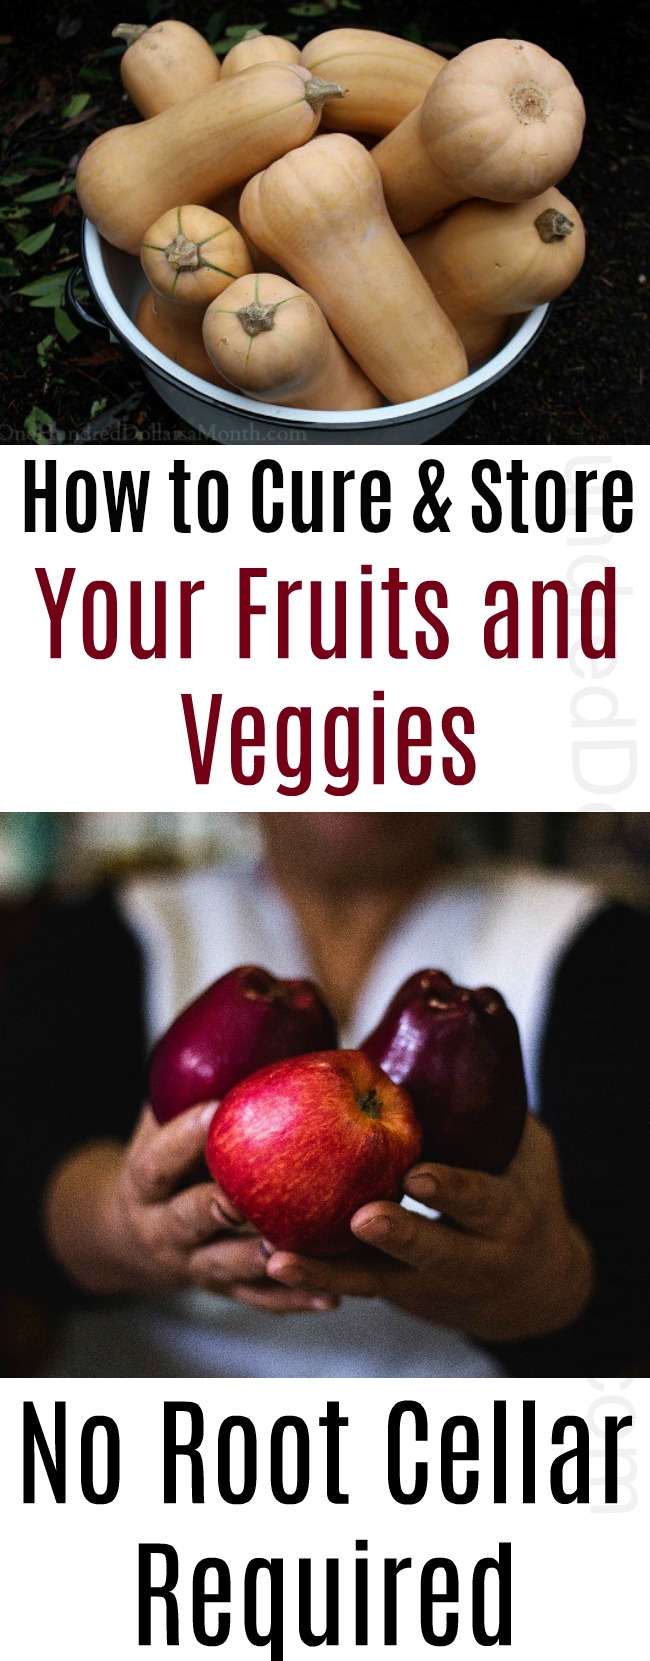 How to Cure and Store Your Fruits and Veggies: No Root Cellar Required